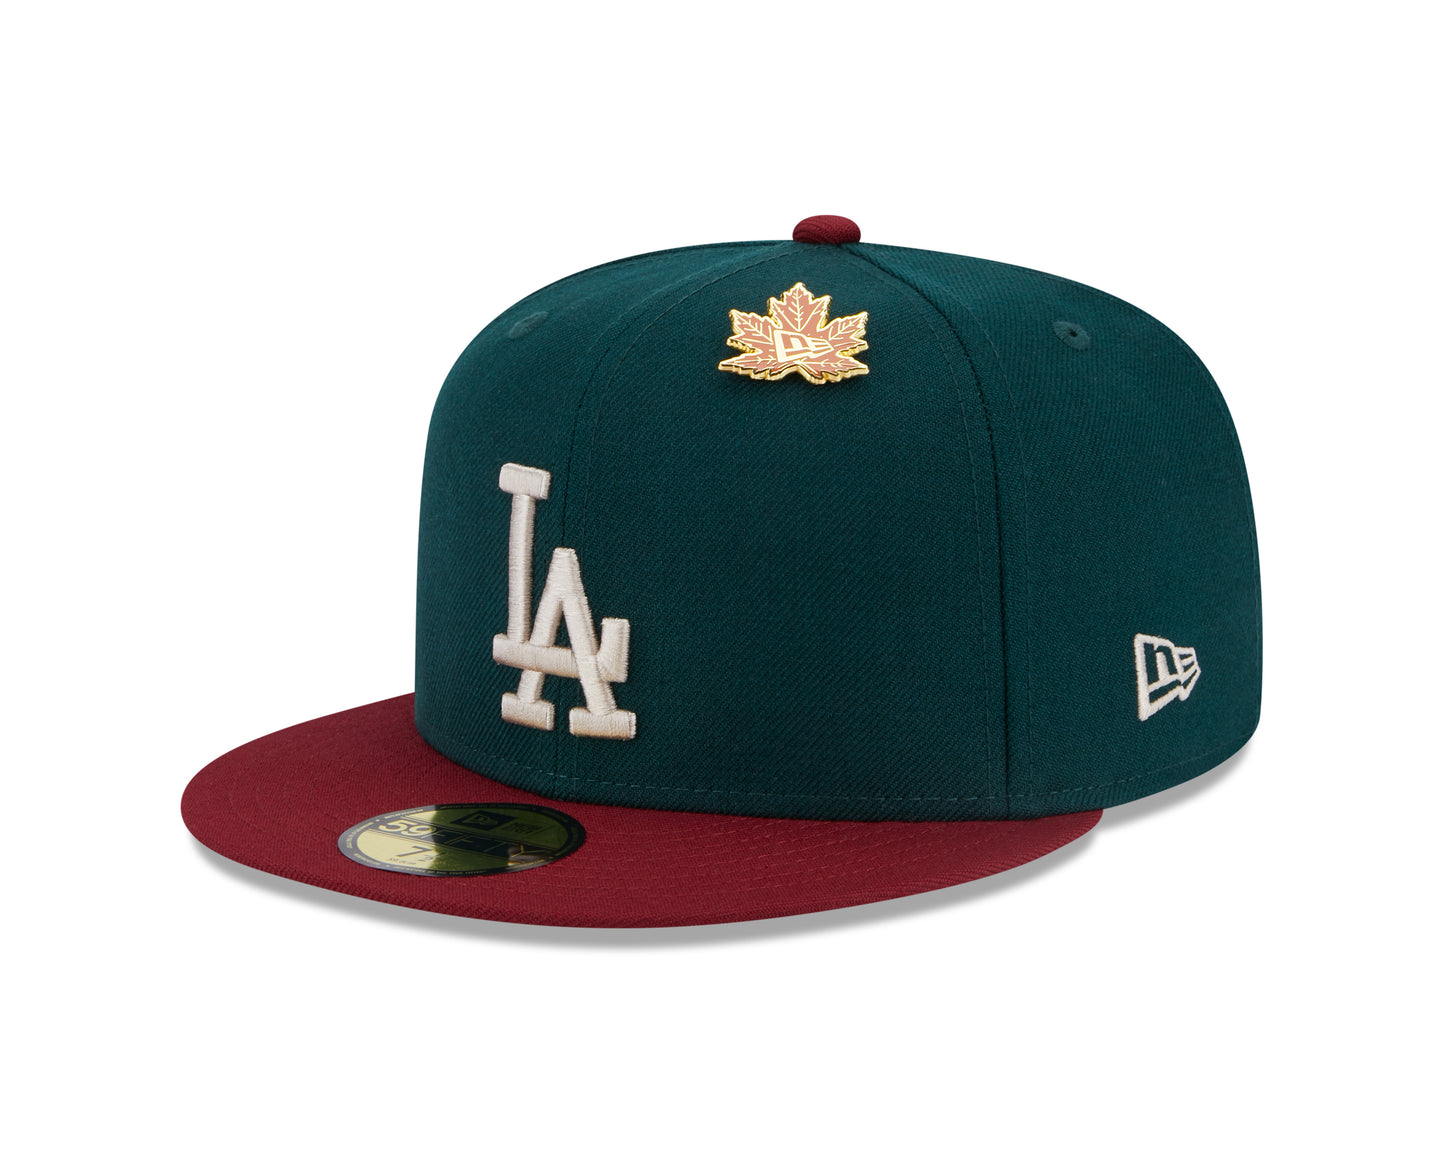 New Era - MLB WS Contrast 59Fifty Fitted - Los Angeles Dodgers - Green/Red - Headz Up 